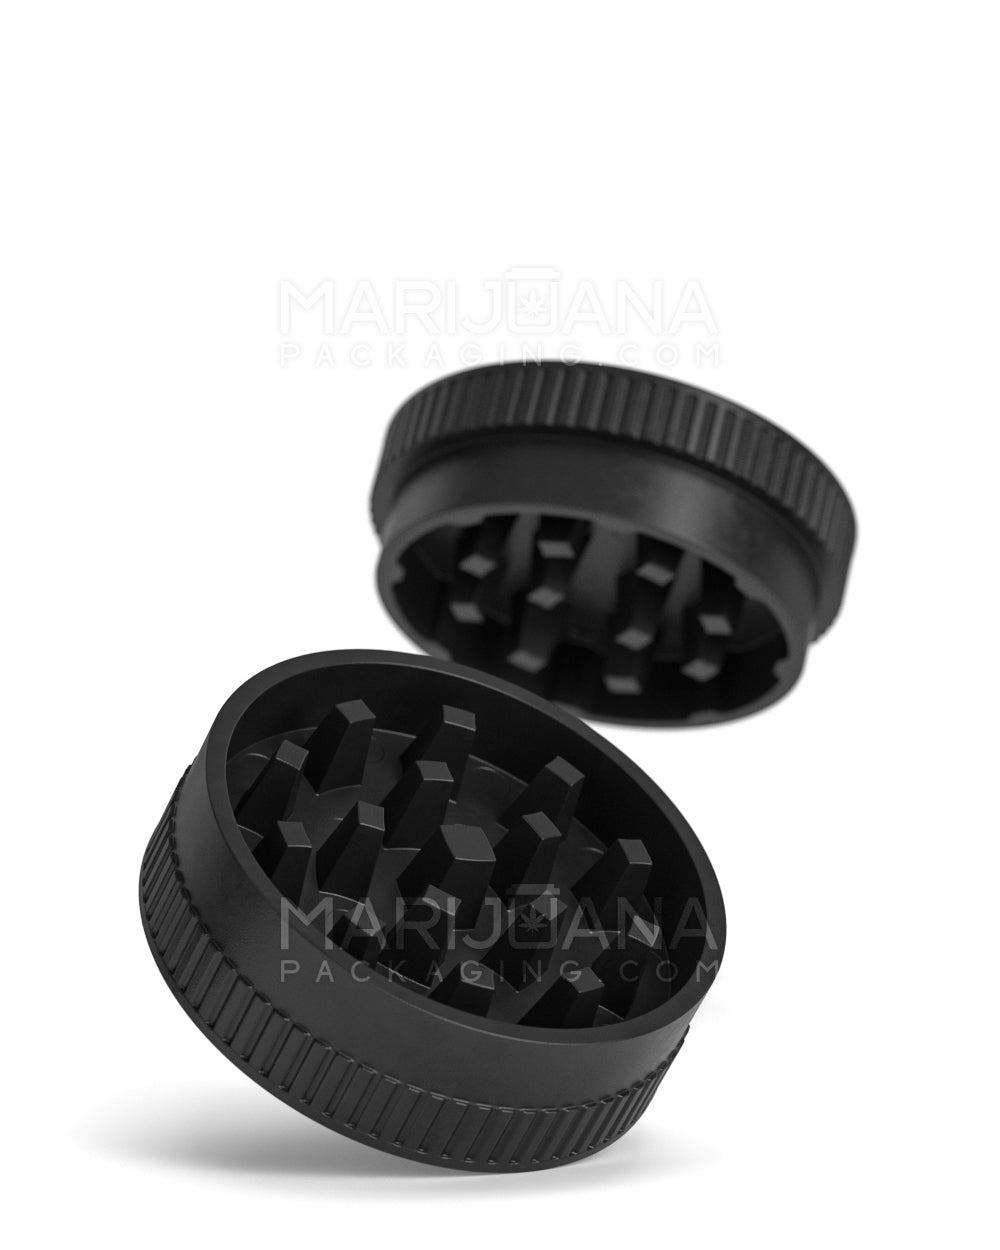 Biodegradable Thick Wall Black Grinder | 2 Piece - 55mm - 12 Count - 8